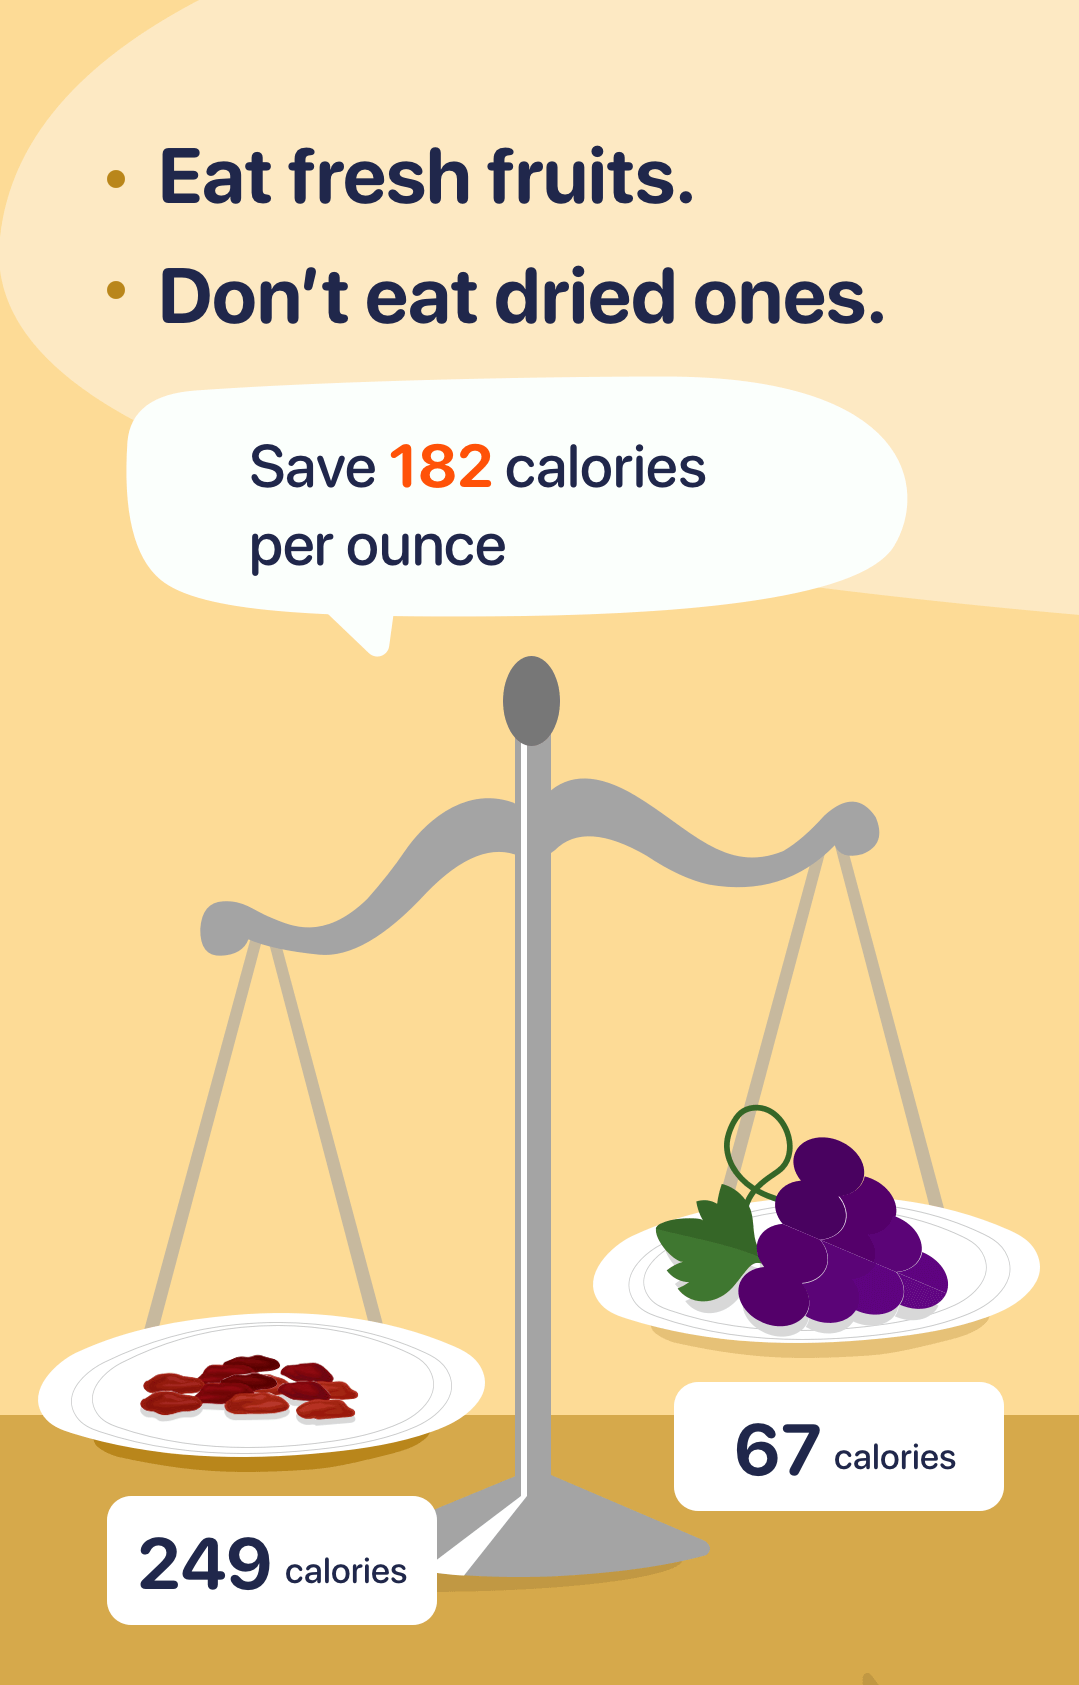 eat fresh fruits instead of dried ones